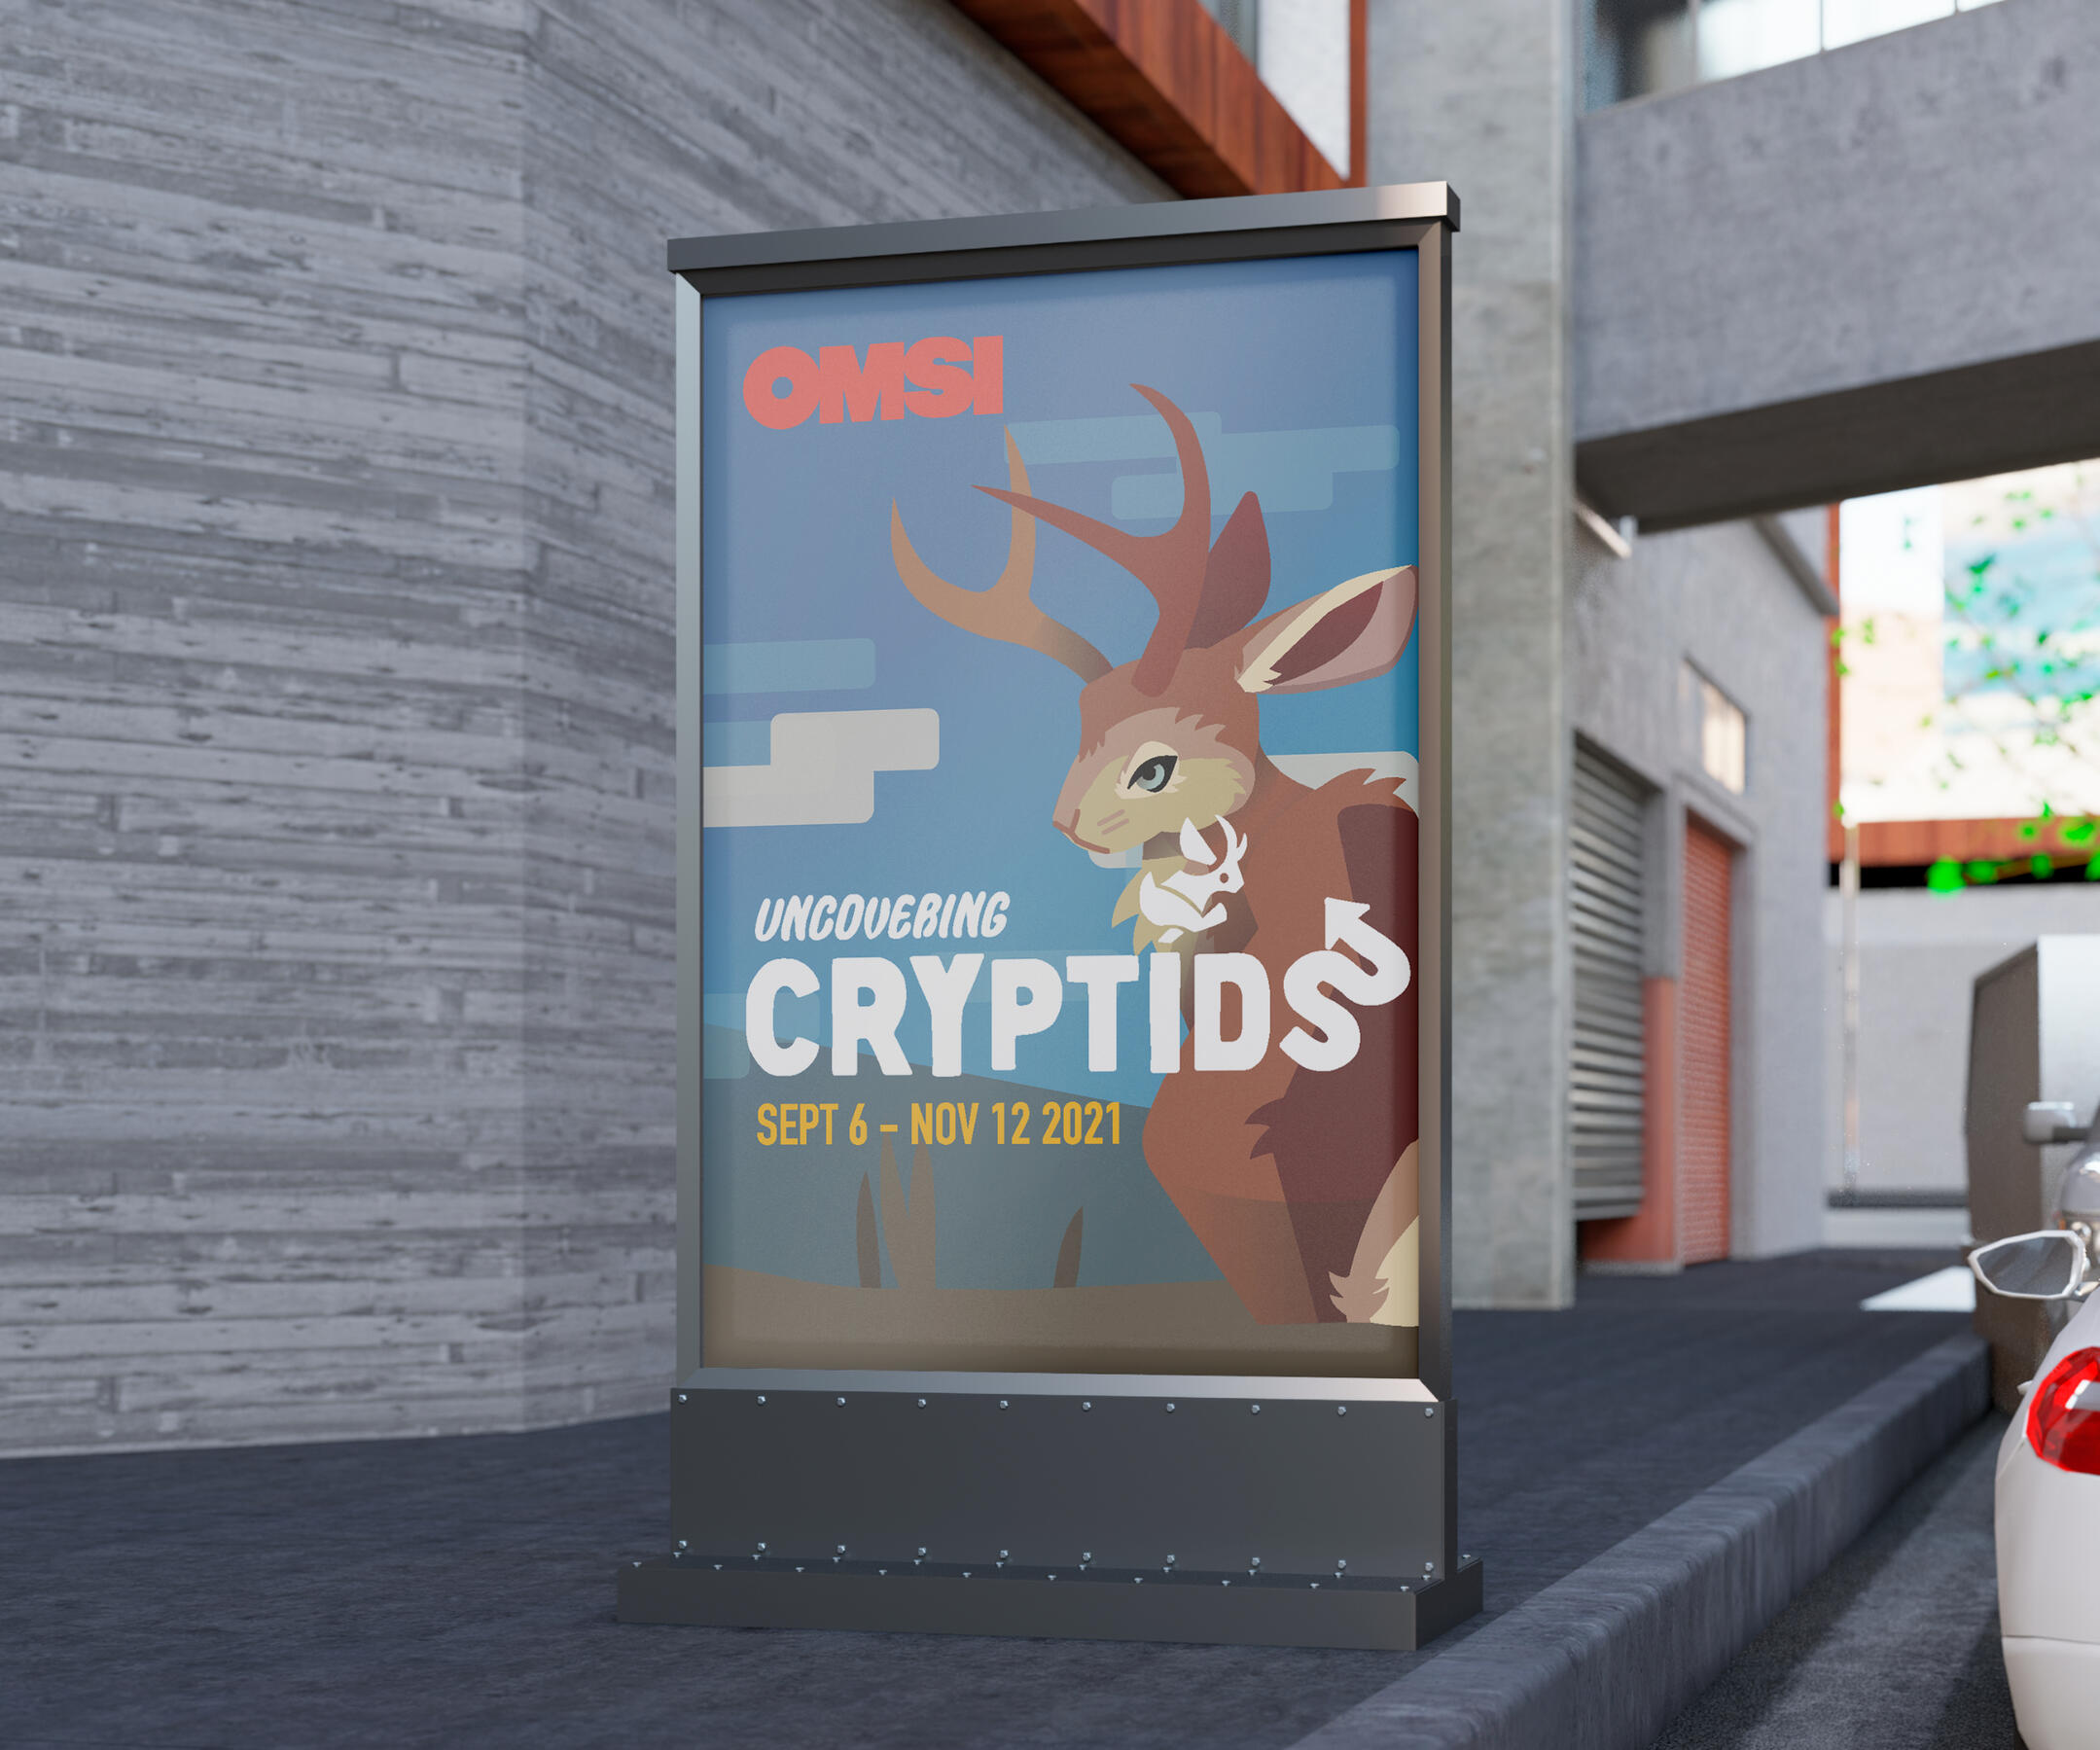 A billboard mockup for the OMSI: Uncovering Cryptids exhibit